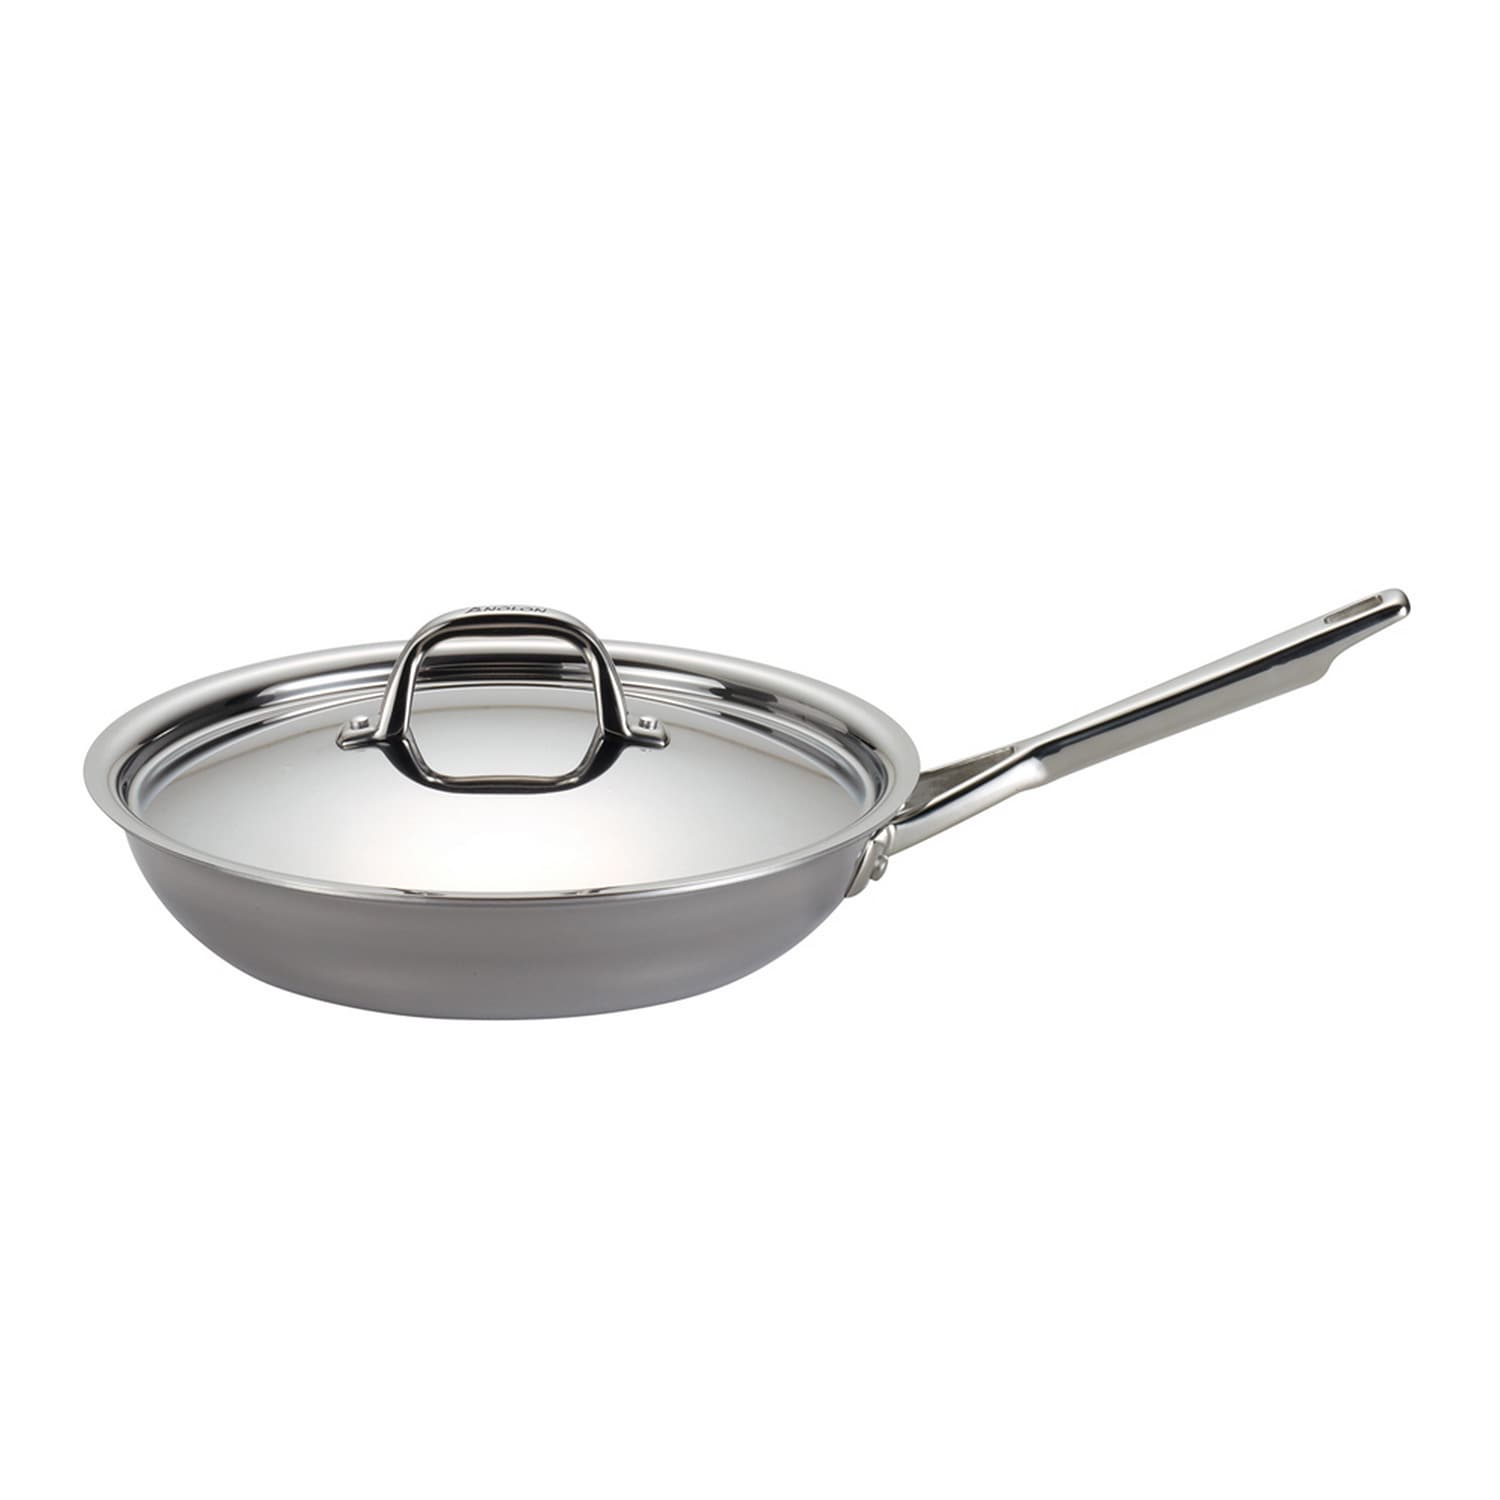 Anolon Tri-Ply Clad Stainless Steel 12-3/4 French Skillet 